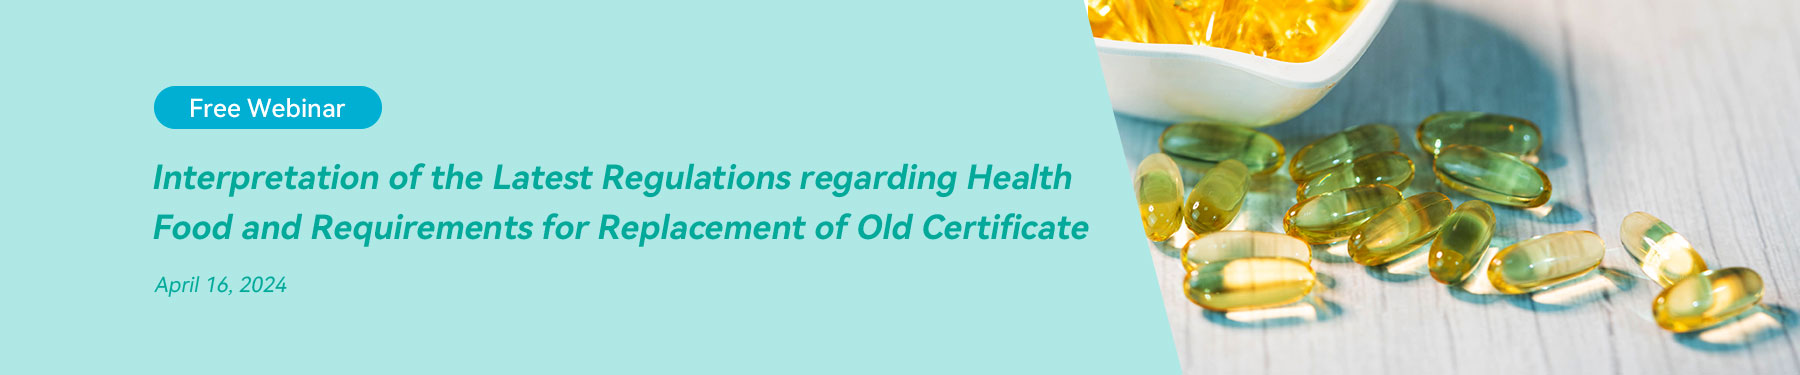 FAQ,Food,Health,Replacement,Certificate,Requirements